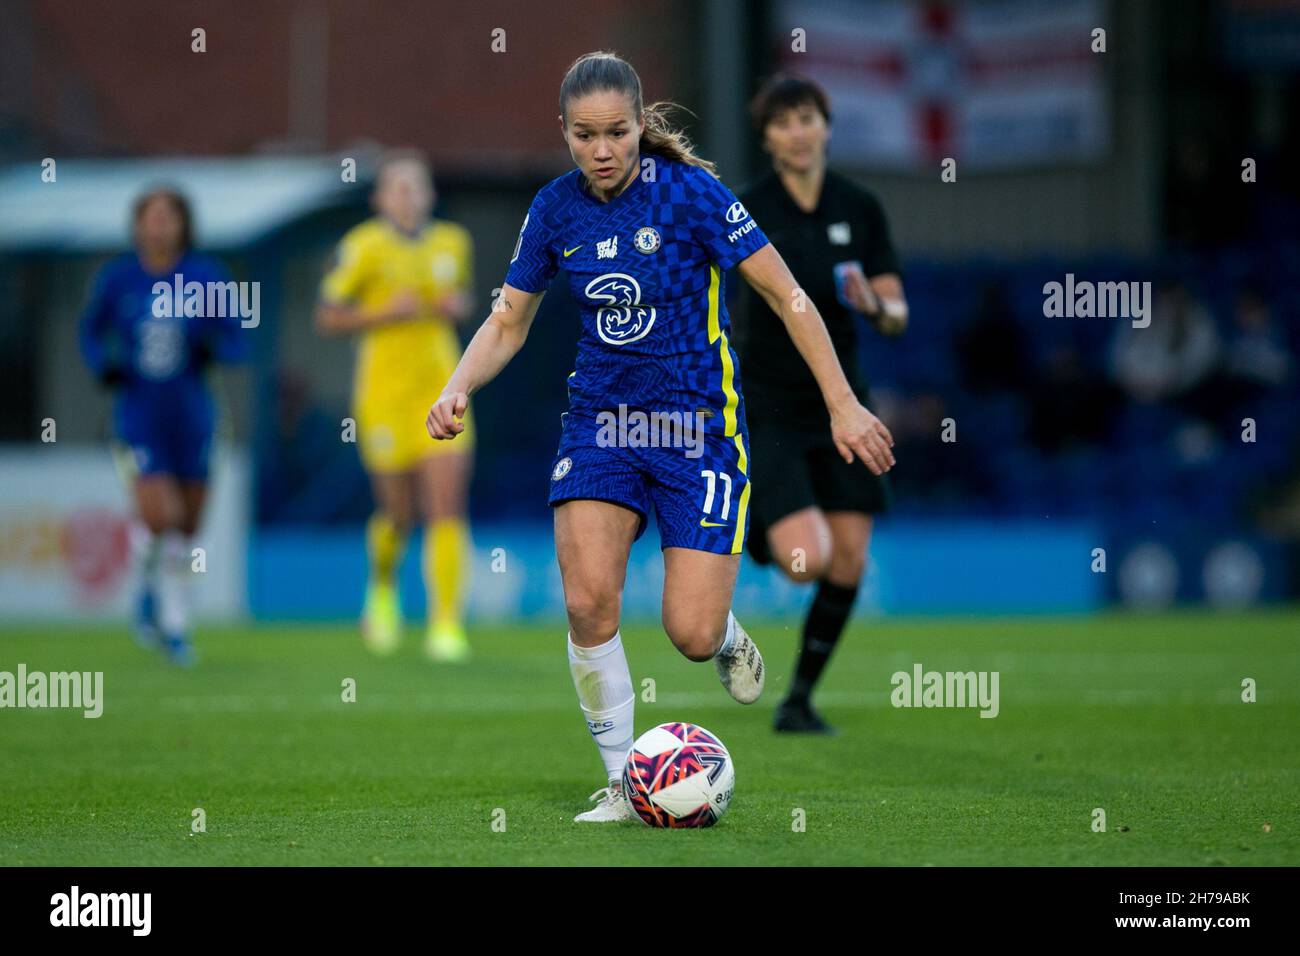 London, UK. 21st Nov, 2021. LONDON, UK. NOVEMBER 21ST : Guro Reiten of Chelsea FC controls the ball during the 2021-22 FA Womens Superleague fixture between Chelsea FC and Birmingham City at Kingsmeadow. Credit: Federico Guerra Morán/Alamy Live News Stock Photo